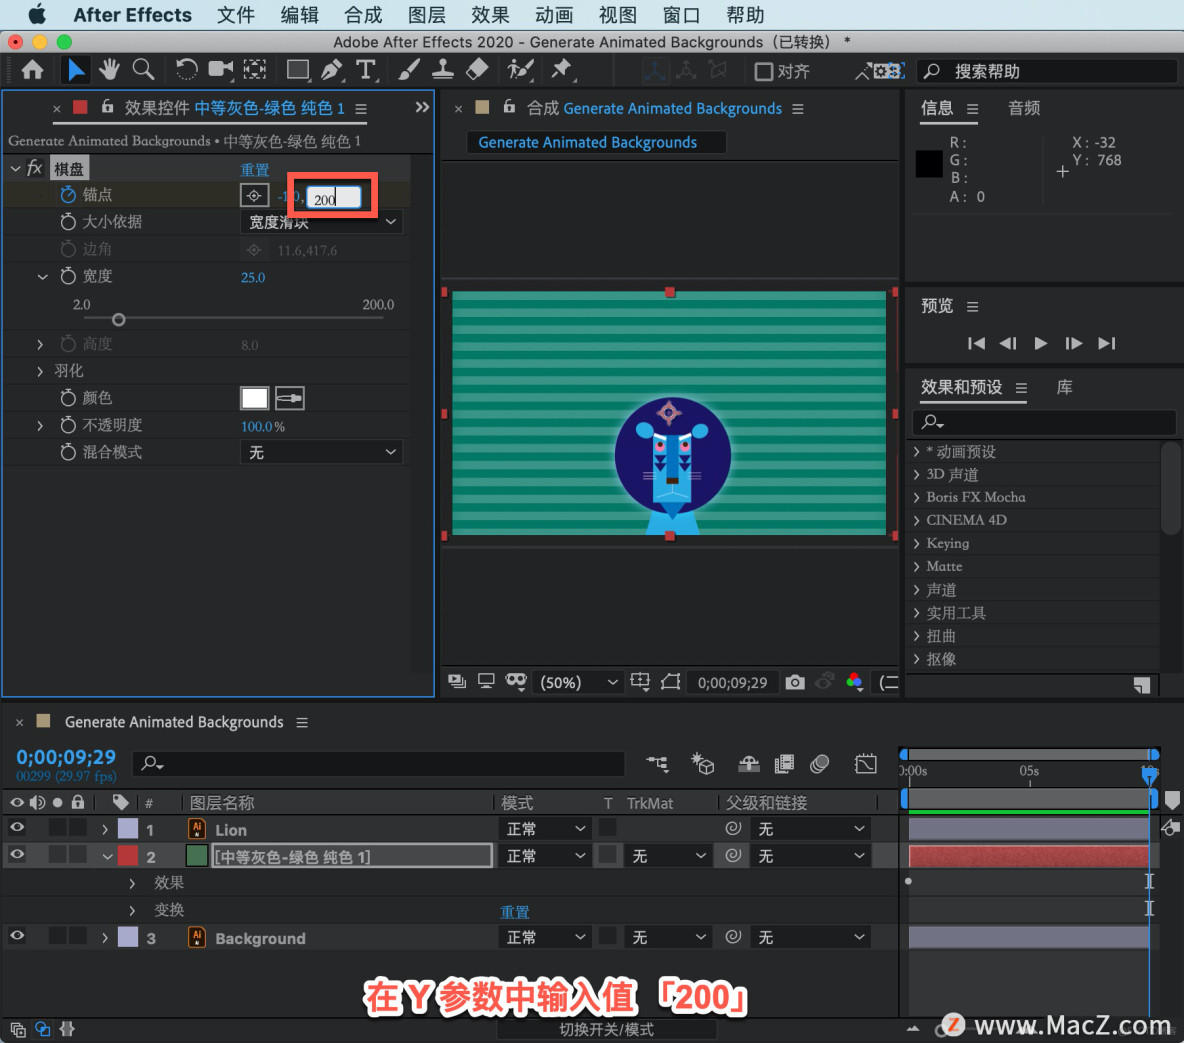 After Effects 教程，如何在 After Effects 中给条纹背景添加动画效果？_AE_03